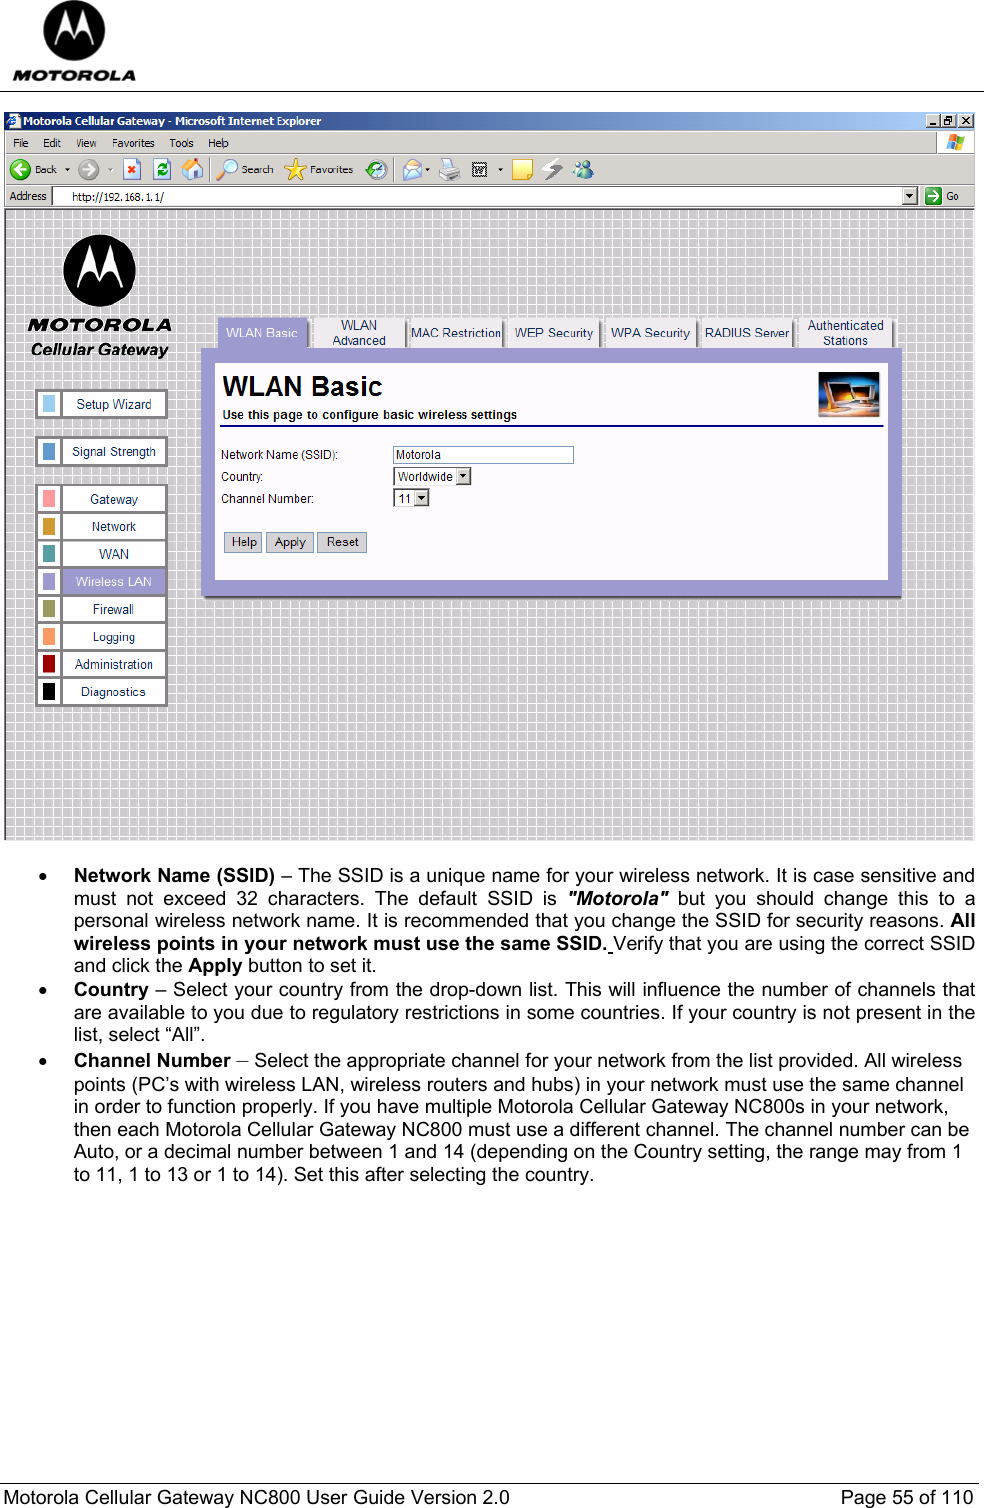  Motorola Cellular Gateway NC800 User Guide Version 2.0     Page 55 of 110    • Network Name (SSlD) – The SSID is a unique name for your wireless network. It is case sensitive and must not exceed 32 characters. The default SSID is &quot;Motorola&quot; but you should change this to a personal wireless network name. It is recommended that you change the SSID for security reasons. All wireless points in your network must use the same SSID. Verify that you are using the correct SSID and click the Apply button to set it. • Country – Select your country from the drop-down list. This will influence the number of channels that are available to you due to regulatory restrictions in some countries. If your country is not present in the list, select “All”. • Channel Number – Select the appropriate channel for your network from the list provided. All wireless points (PC’s with wireless LAN, wireless routers and hubs) in your network must use the same channel in order to function properly. If you have multiple Motorola Cellular Gateway NC800s in your network, then each Motorola Cellular Gateway NC800 must use a different channel. The channel number can be Auto, or a decimal number between 1 and 14 (depending on the Country setting, the range may from 1 to 11, 1 to 13 or 1 to 14). Set this after selecting the country.   